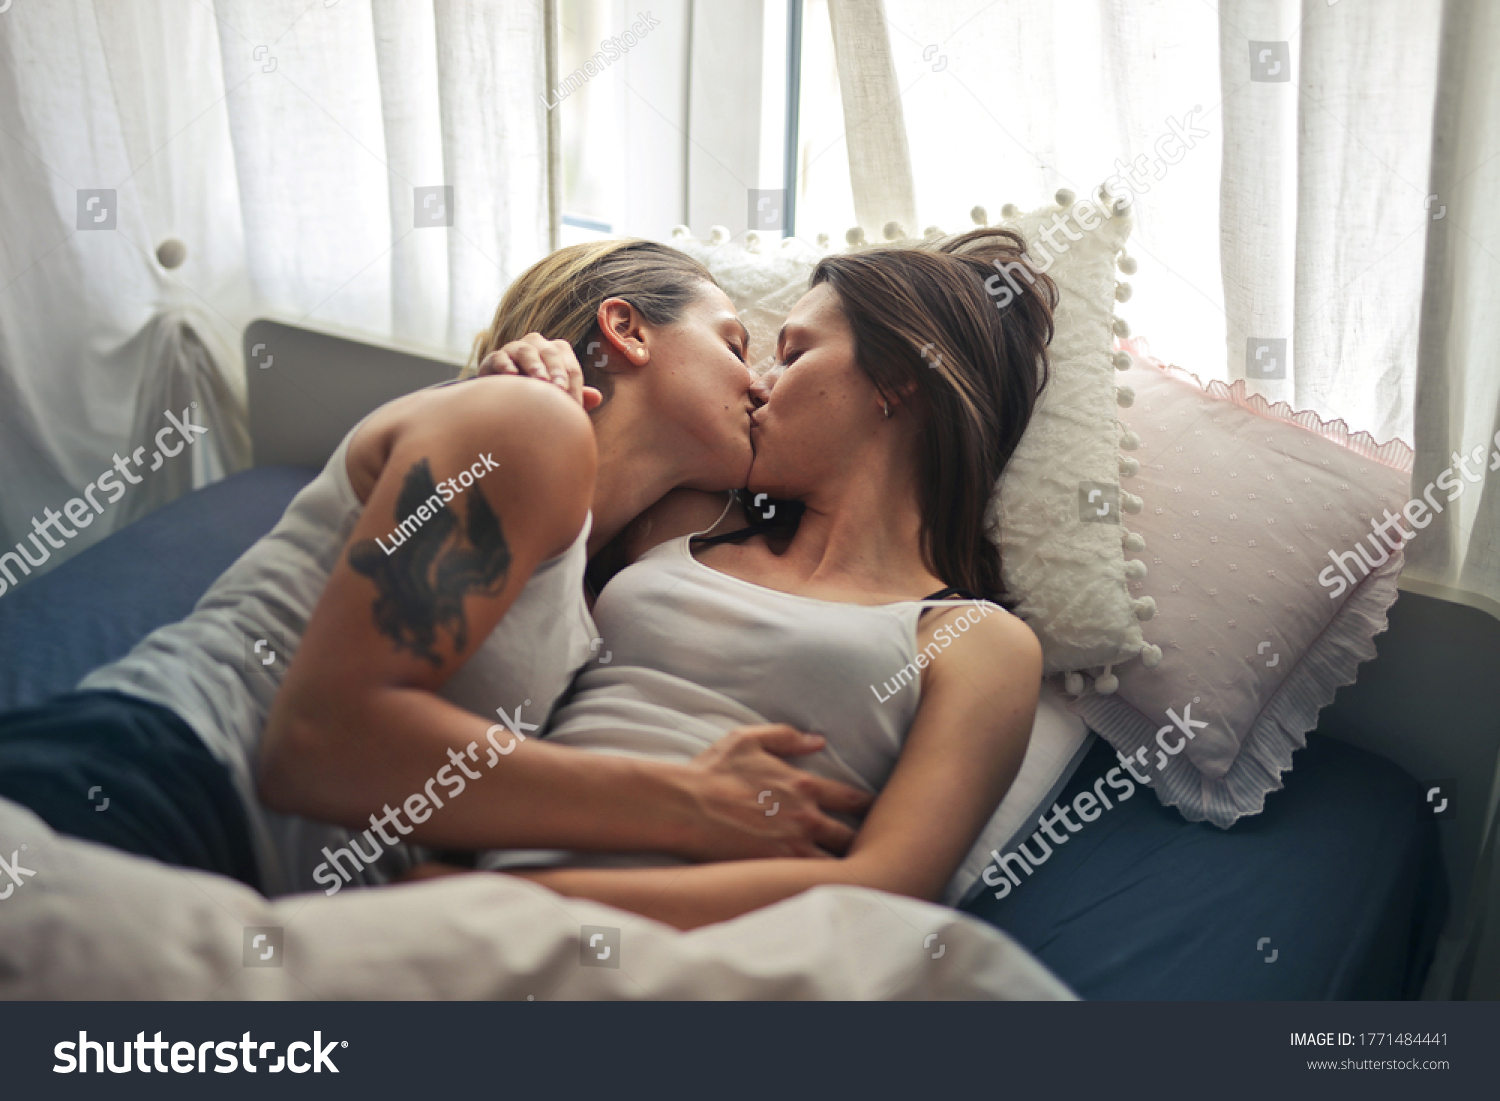 dodod deded add girls kissing in bed photo